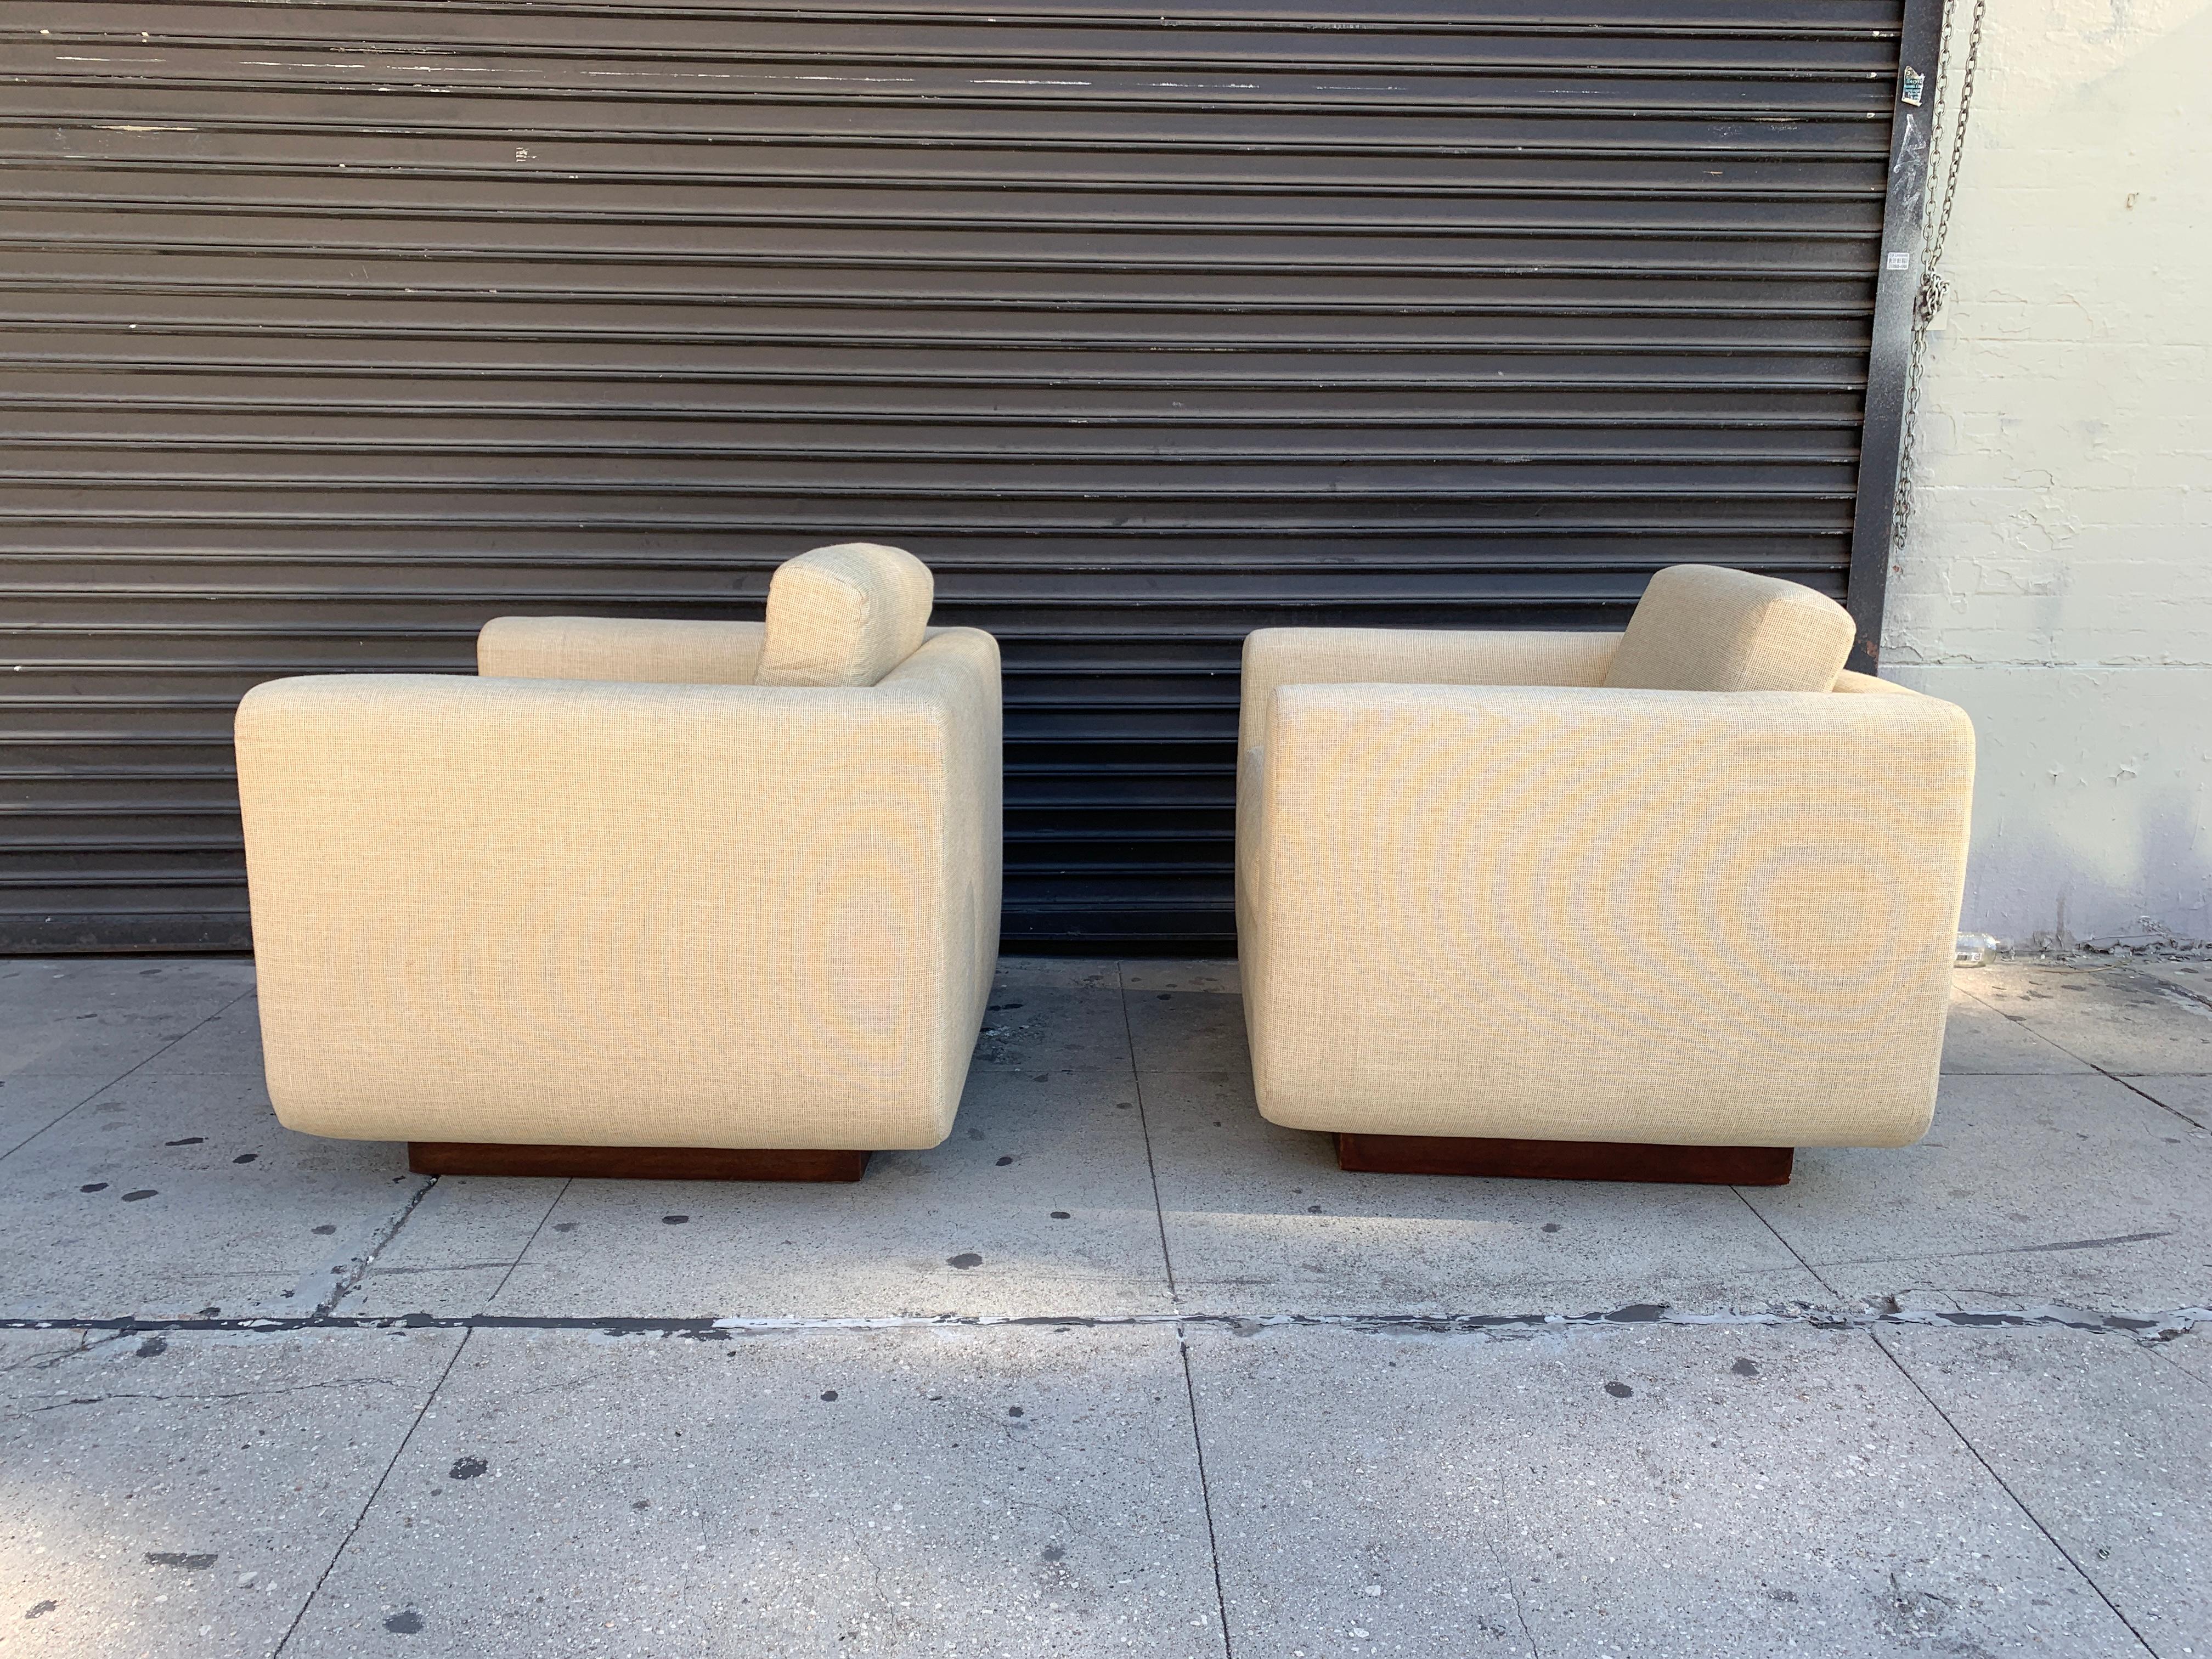 Beautiful pair of club chairs designed and manufactured in the US by Harvey Probber.

These chairs have great proportions, they are very confortable and they are in very good condition, very little wear to frames and fabric.

Measurements:
31